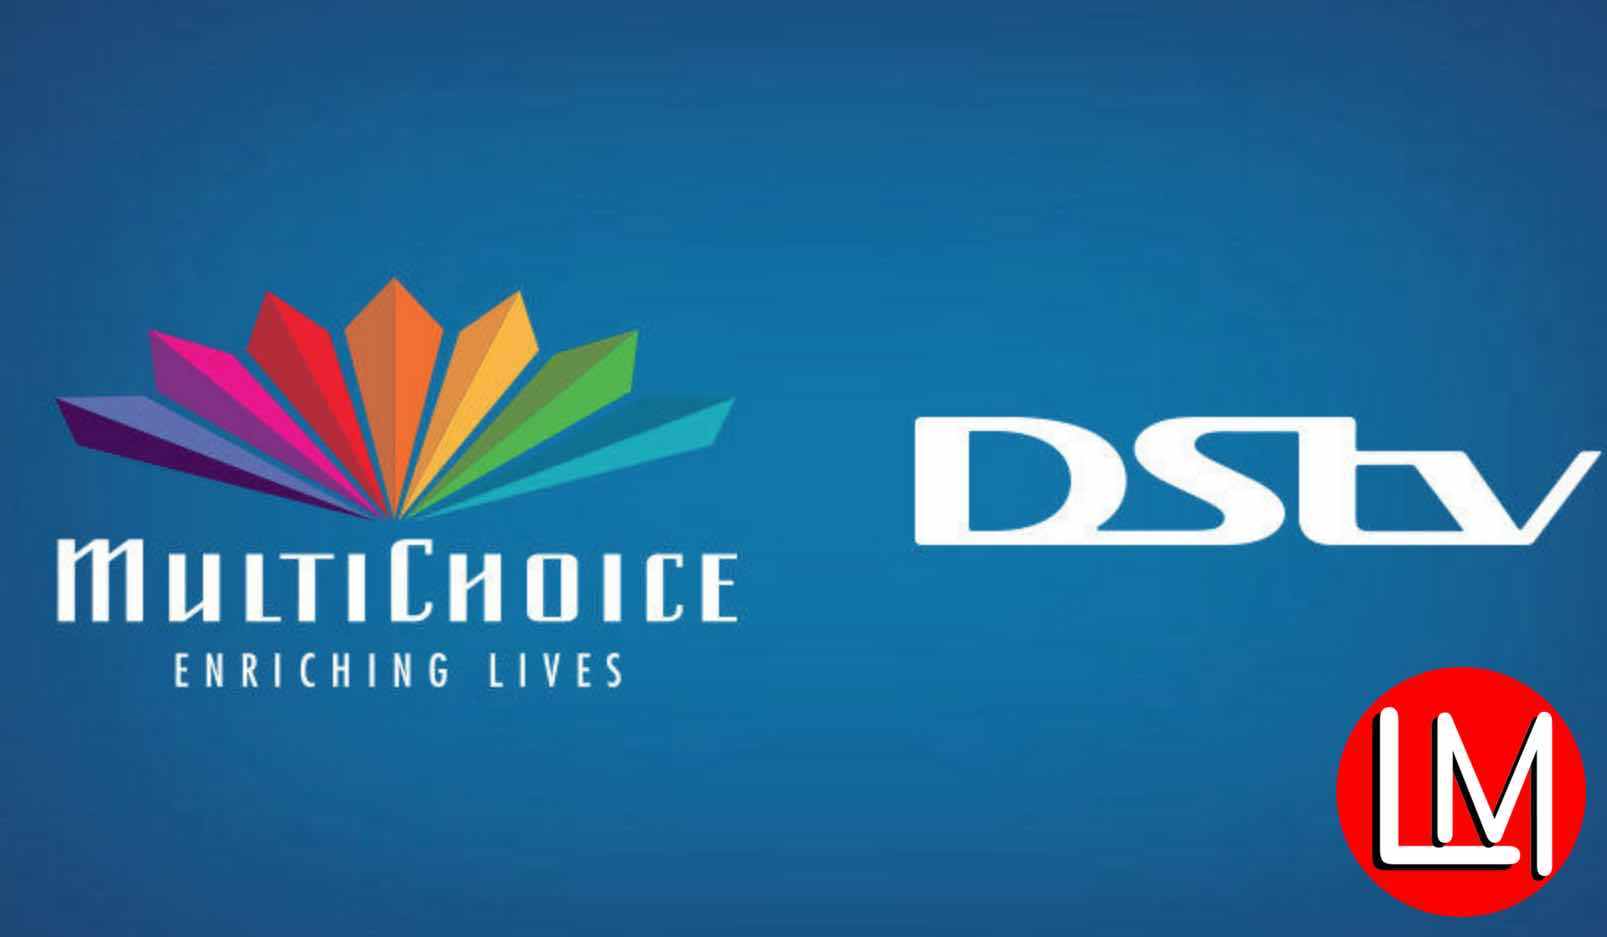 How to crack all dstv channels list